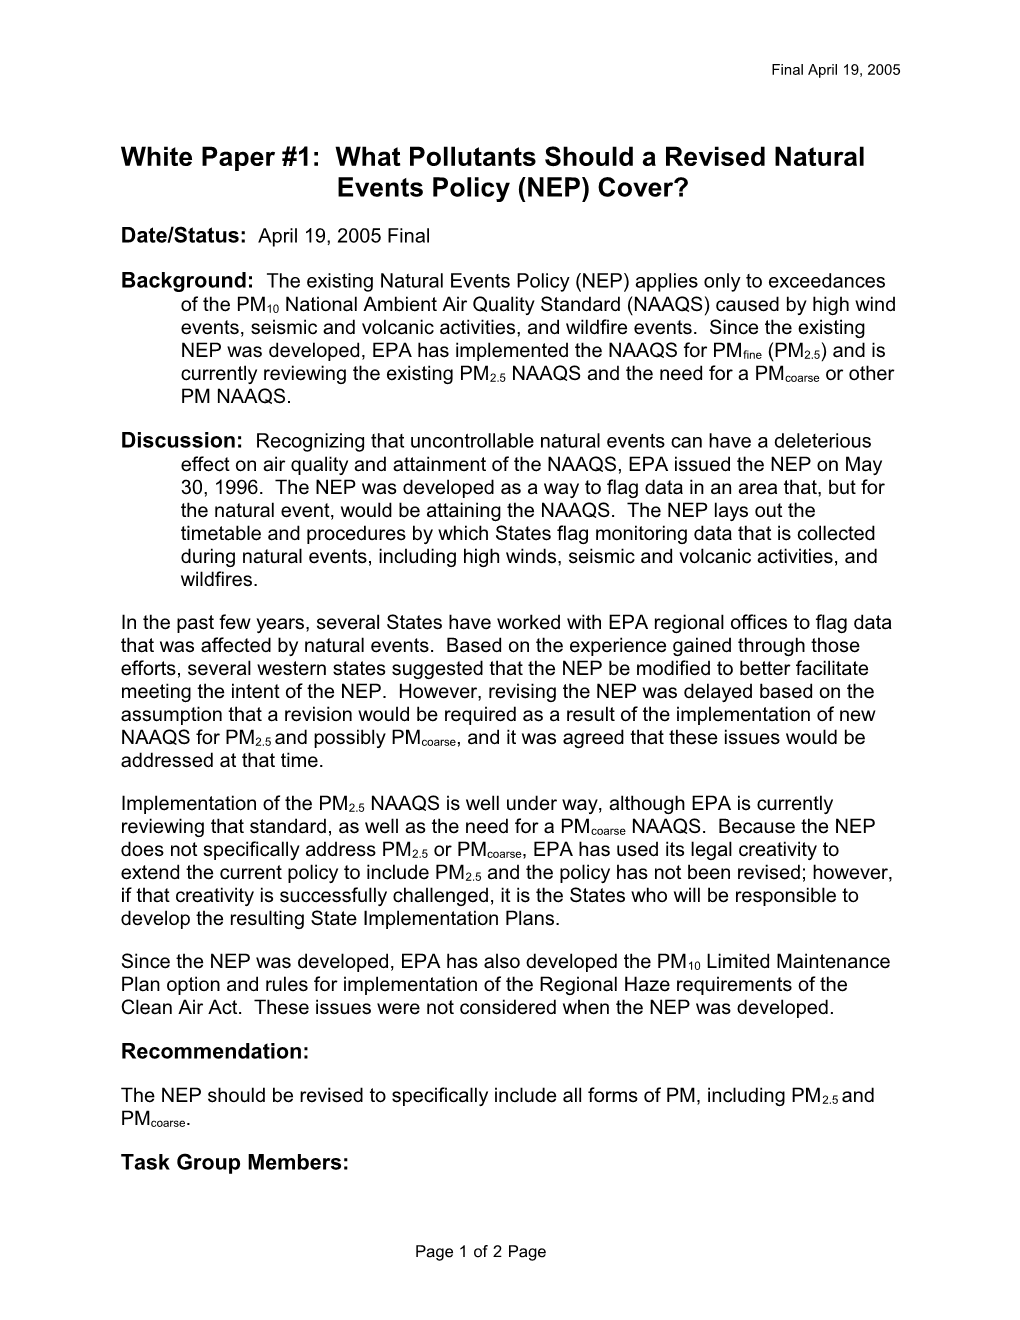 White Paper #1: What Items Should a Revised Natural Events Policy (NEP) Cover